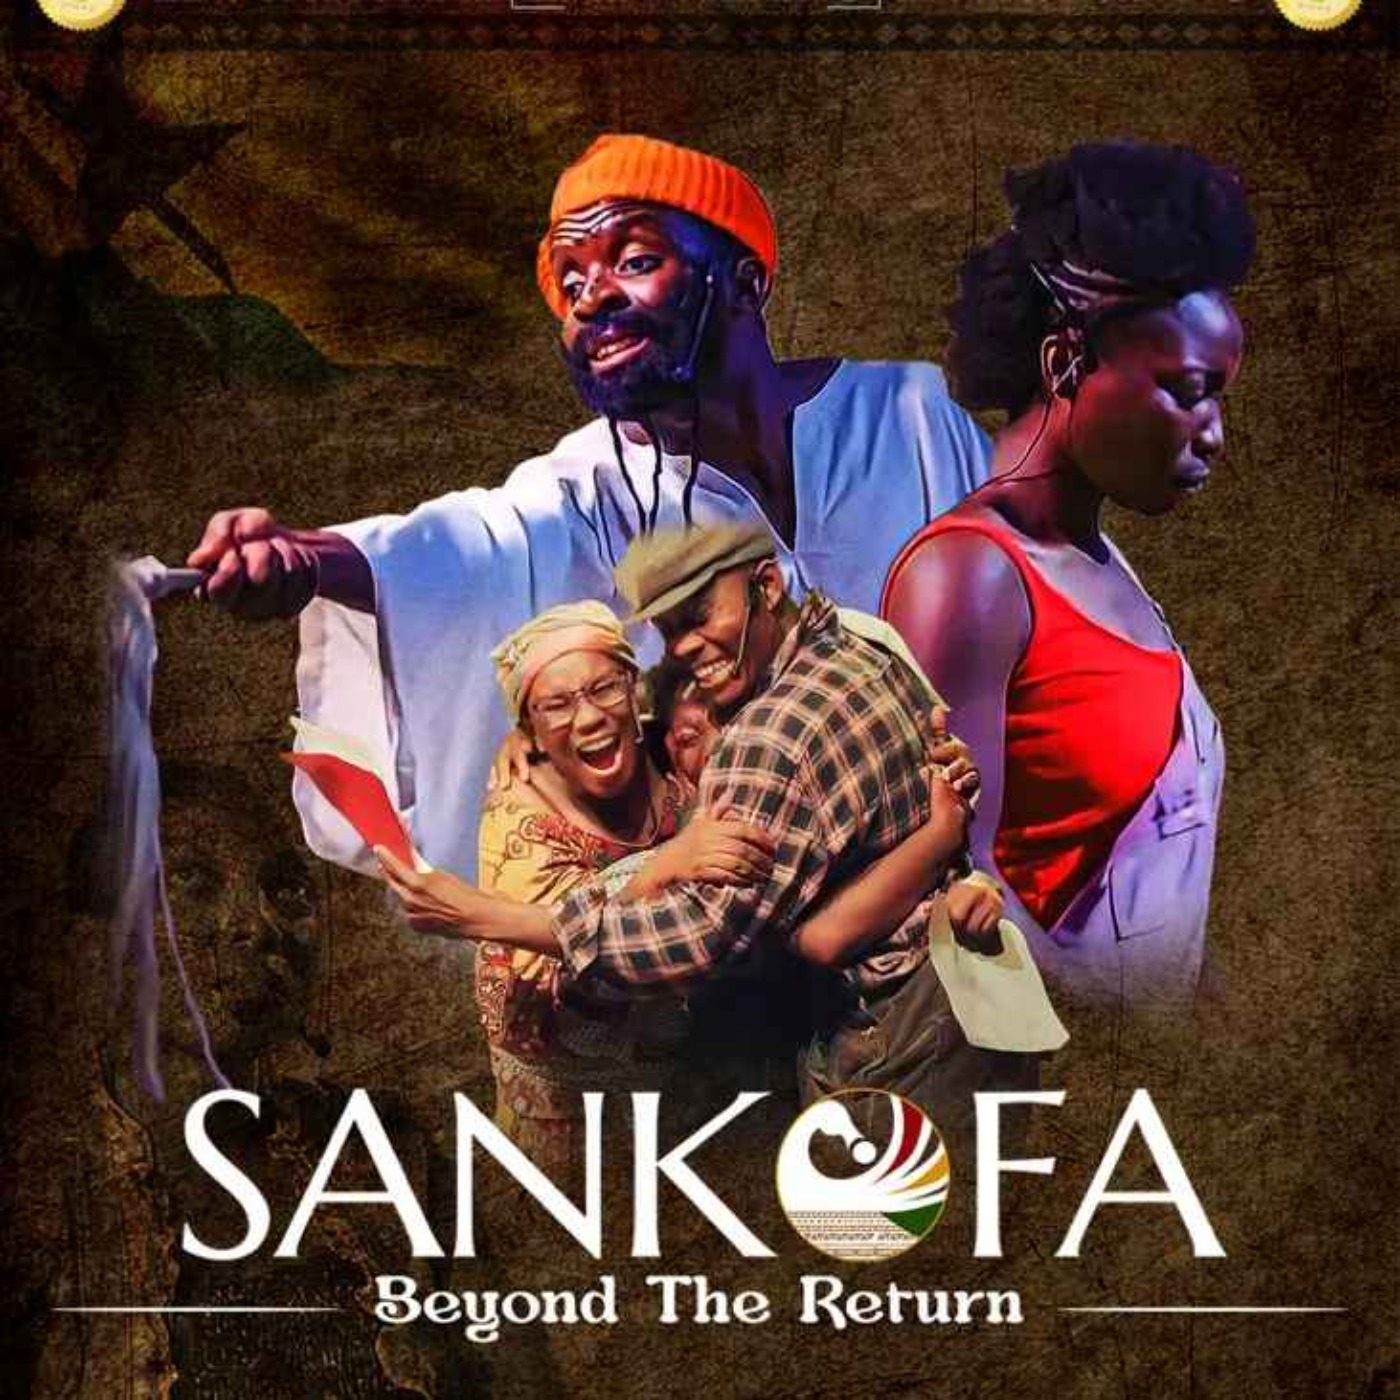 The Cast Of Sankofa The Musical The Toby Gribben Show Highlights On Acast 